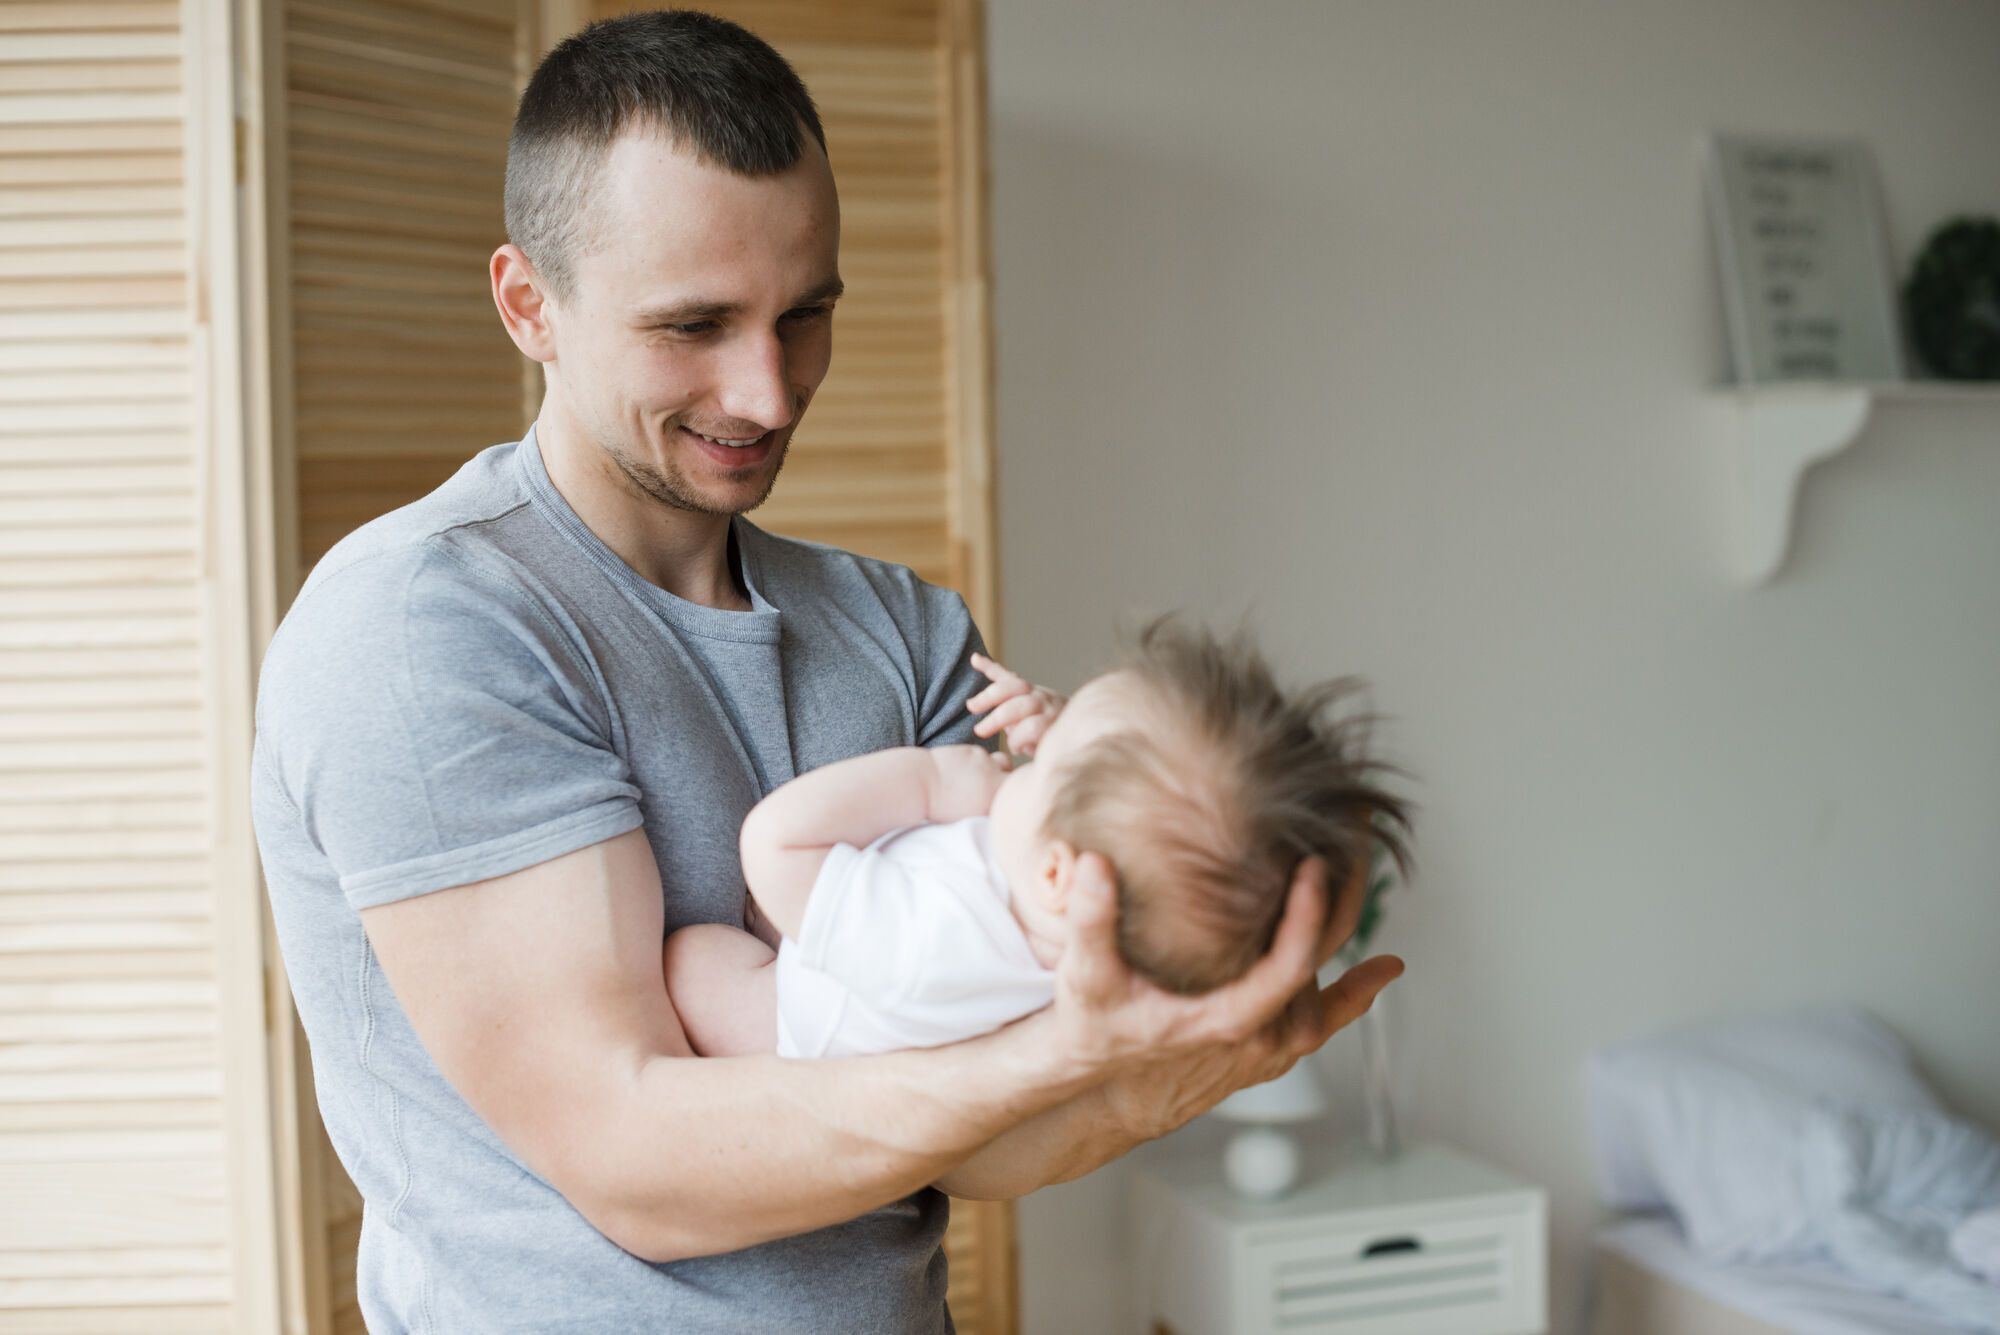 How a man's brain changes after becoming a father. The results of the study